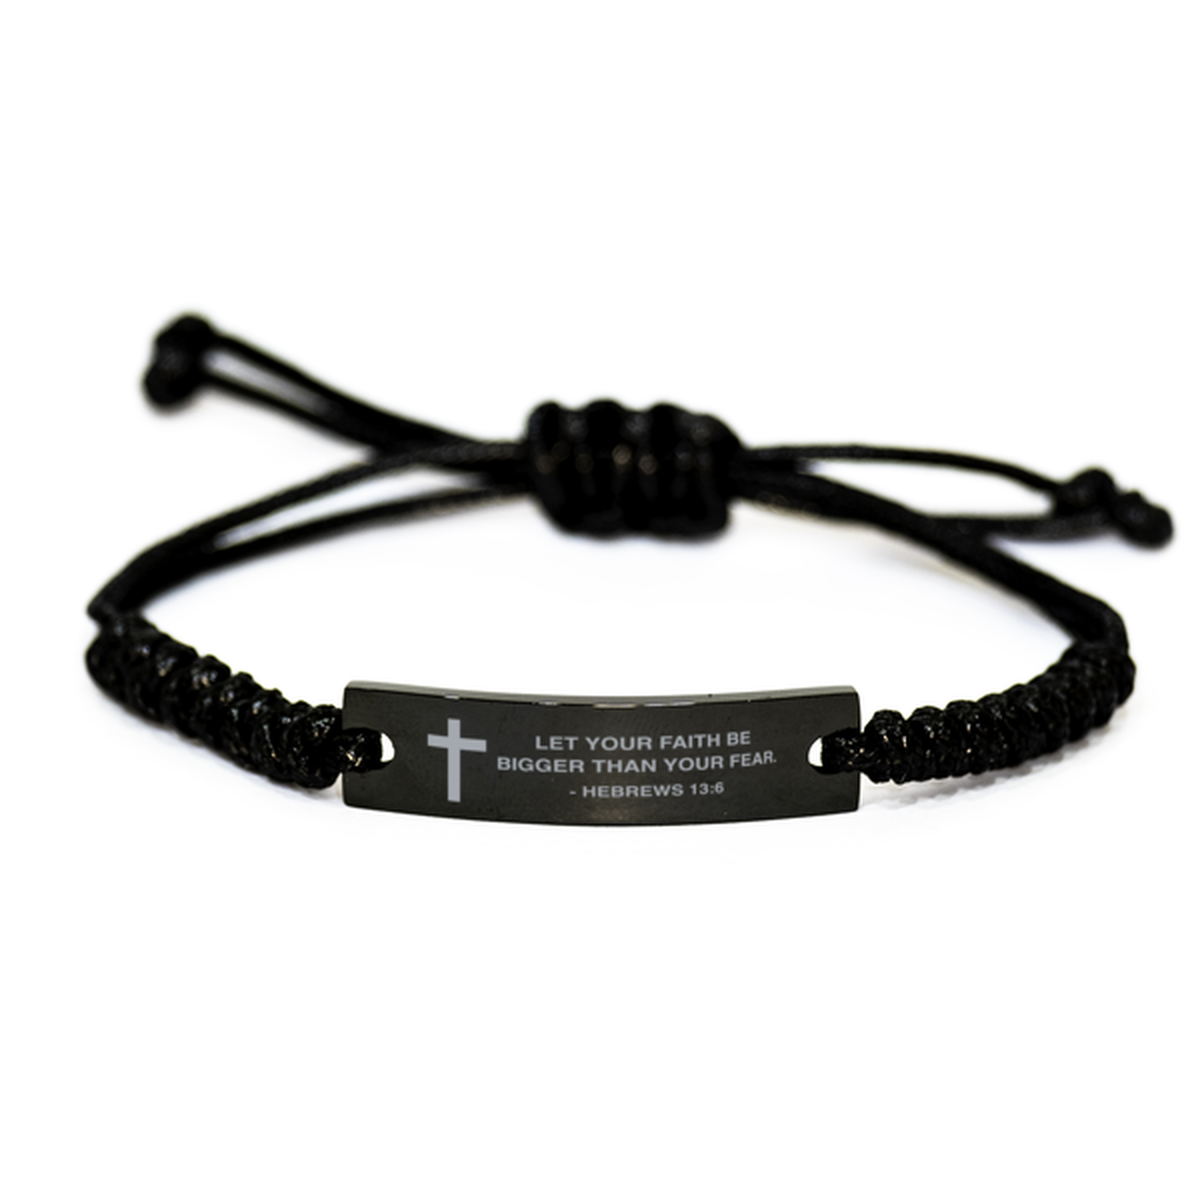 Bible Verse Rope Bracelet, Let Your Faith Be Bigger Than your Fear, Inspirational Christian Gifts For Men Women